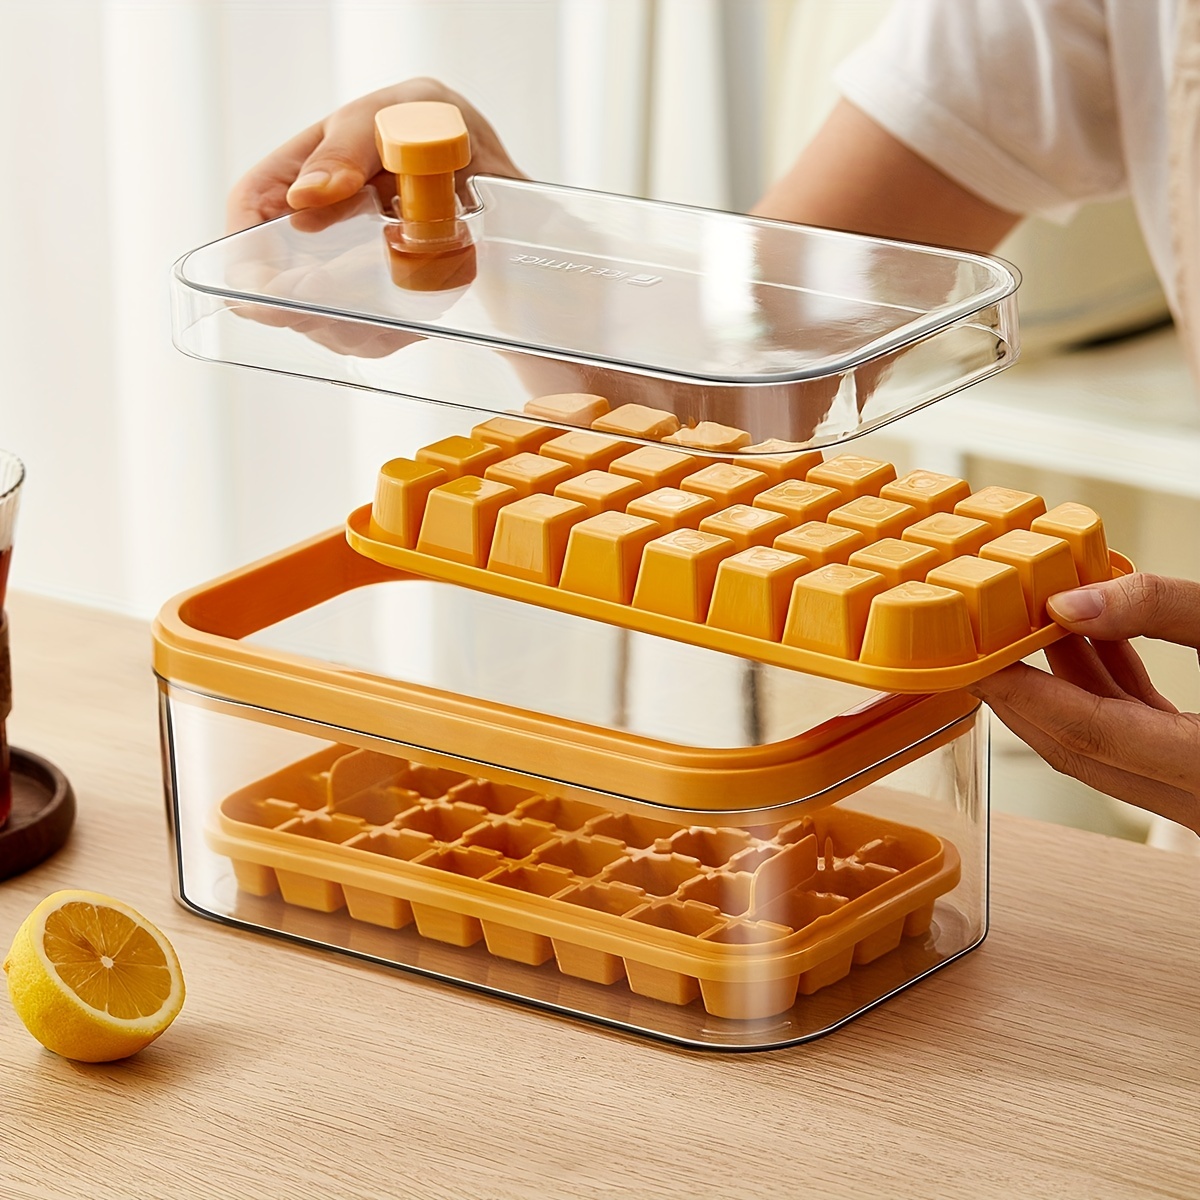 Ice Cube Tray with Lid and Bin,64 pcs Ice Cubes Molds for Freezer,Easy  Release Ice maker Trays With Container and Removable Lid & Scoop,Ice Cube  Tray